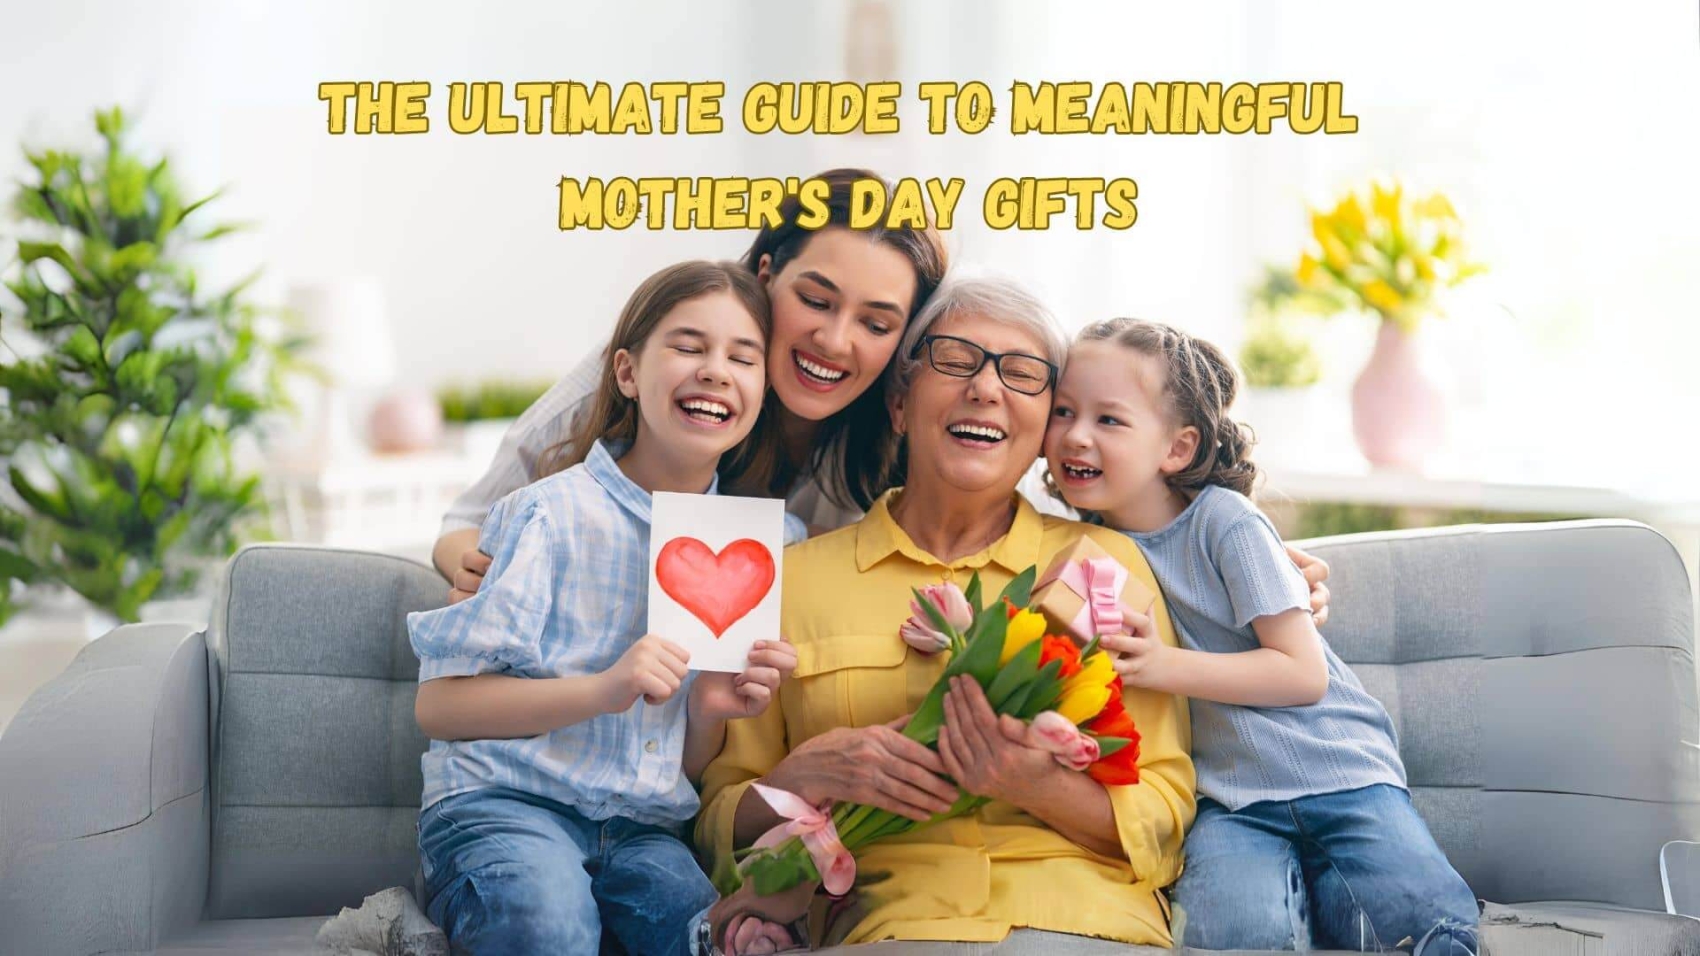 Mother's Day Gift Guide from junky Shopper.